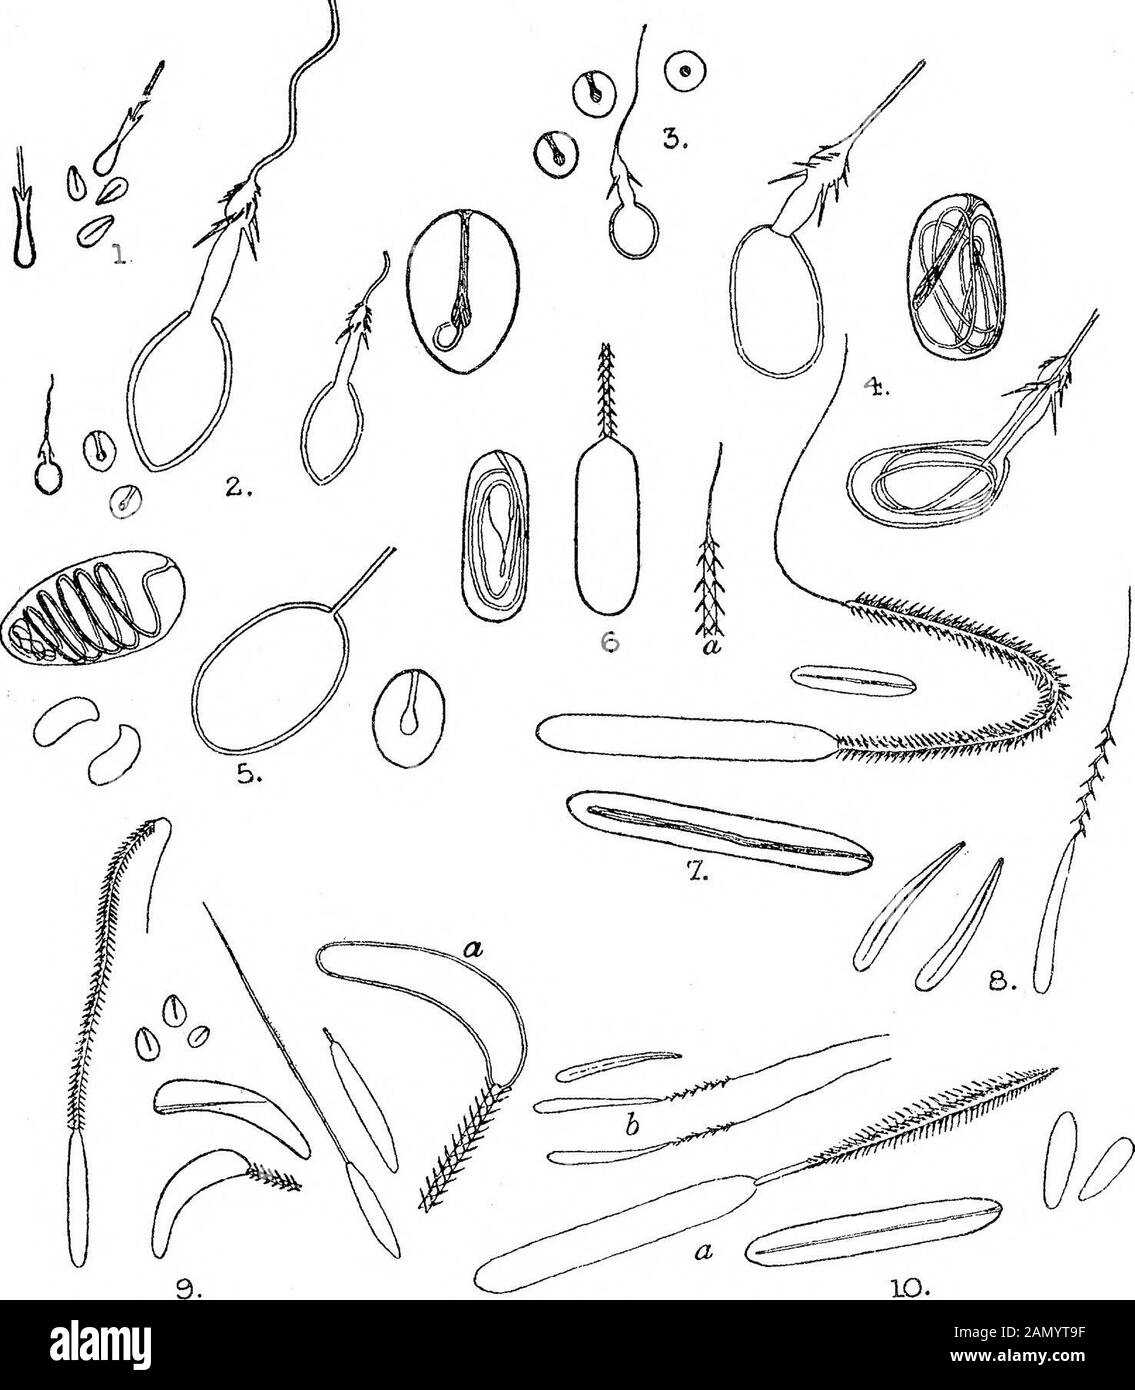 On the Nematocysts of AEolids . ce thelength of the capsule) thick, and closely covered with long fine bristles{^g, 7); or the capsule is slightly curved, about 25 f^ in length, andnarrower in proportion than in the last form, while the thread isuniformly tapering, slightly spiral, and furnished with short relativelystout barbs for a distance rather less than the length of the capsule(fi.g, 8). Both these forms are of frequent occurrence in Solidsbelonging to Berghs sub-family Aeolidiadce poprice. Small nematocysts, 8 /x or less in length, shaped something like anapple pip {fig. 1), are very w Stock Photo